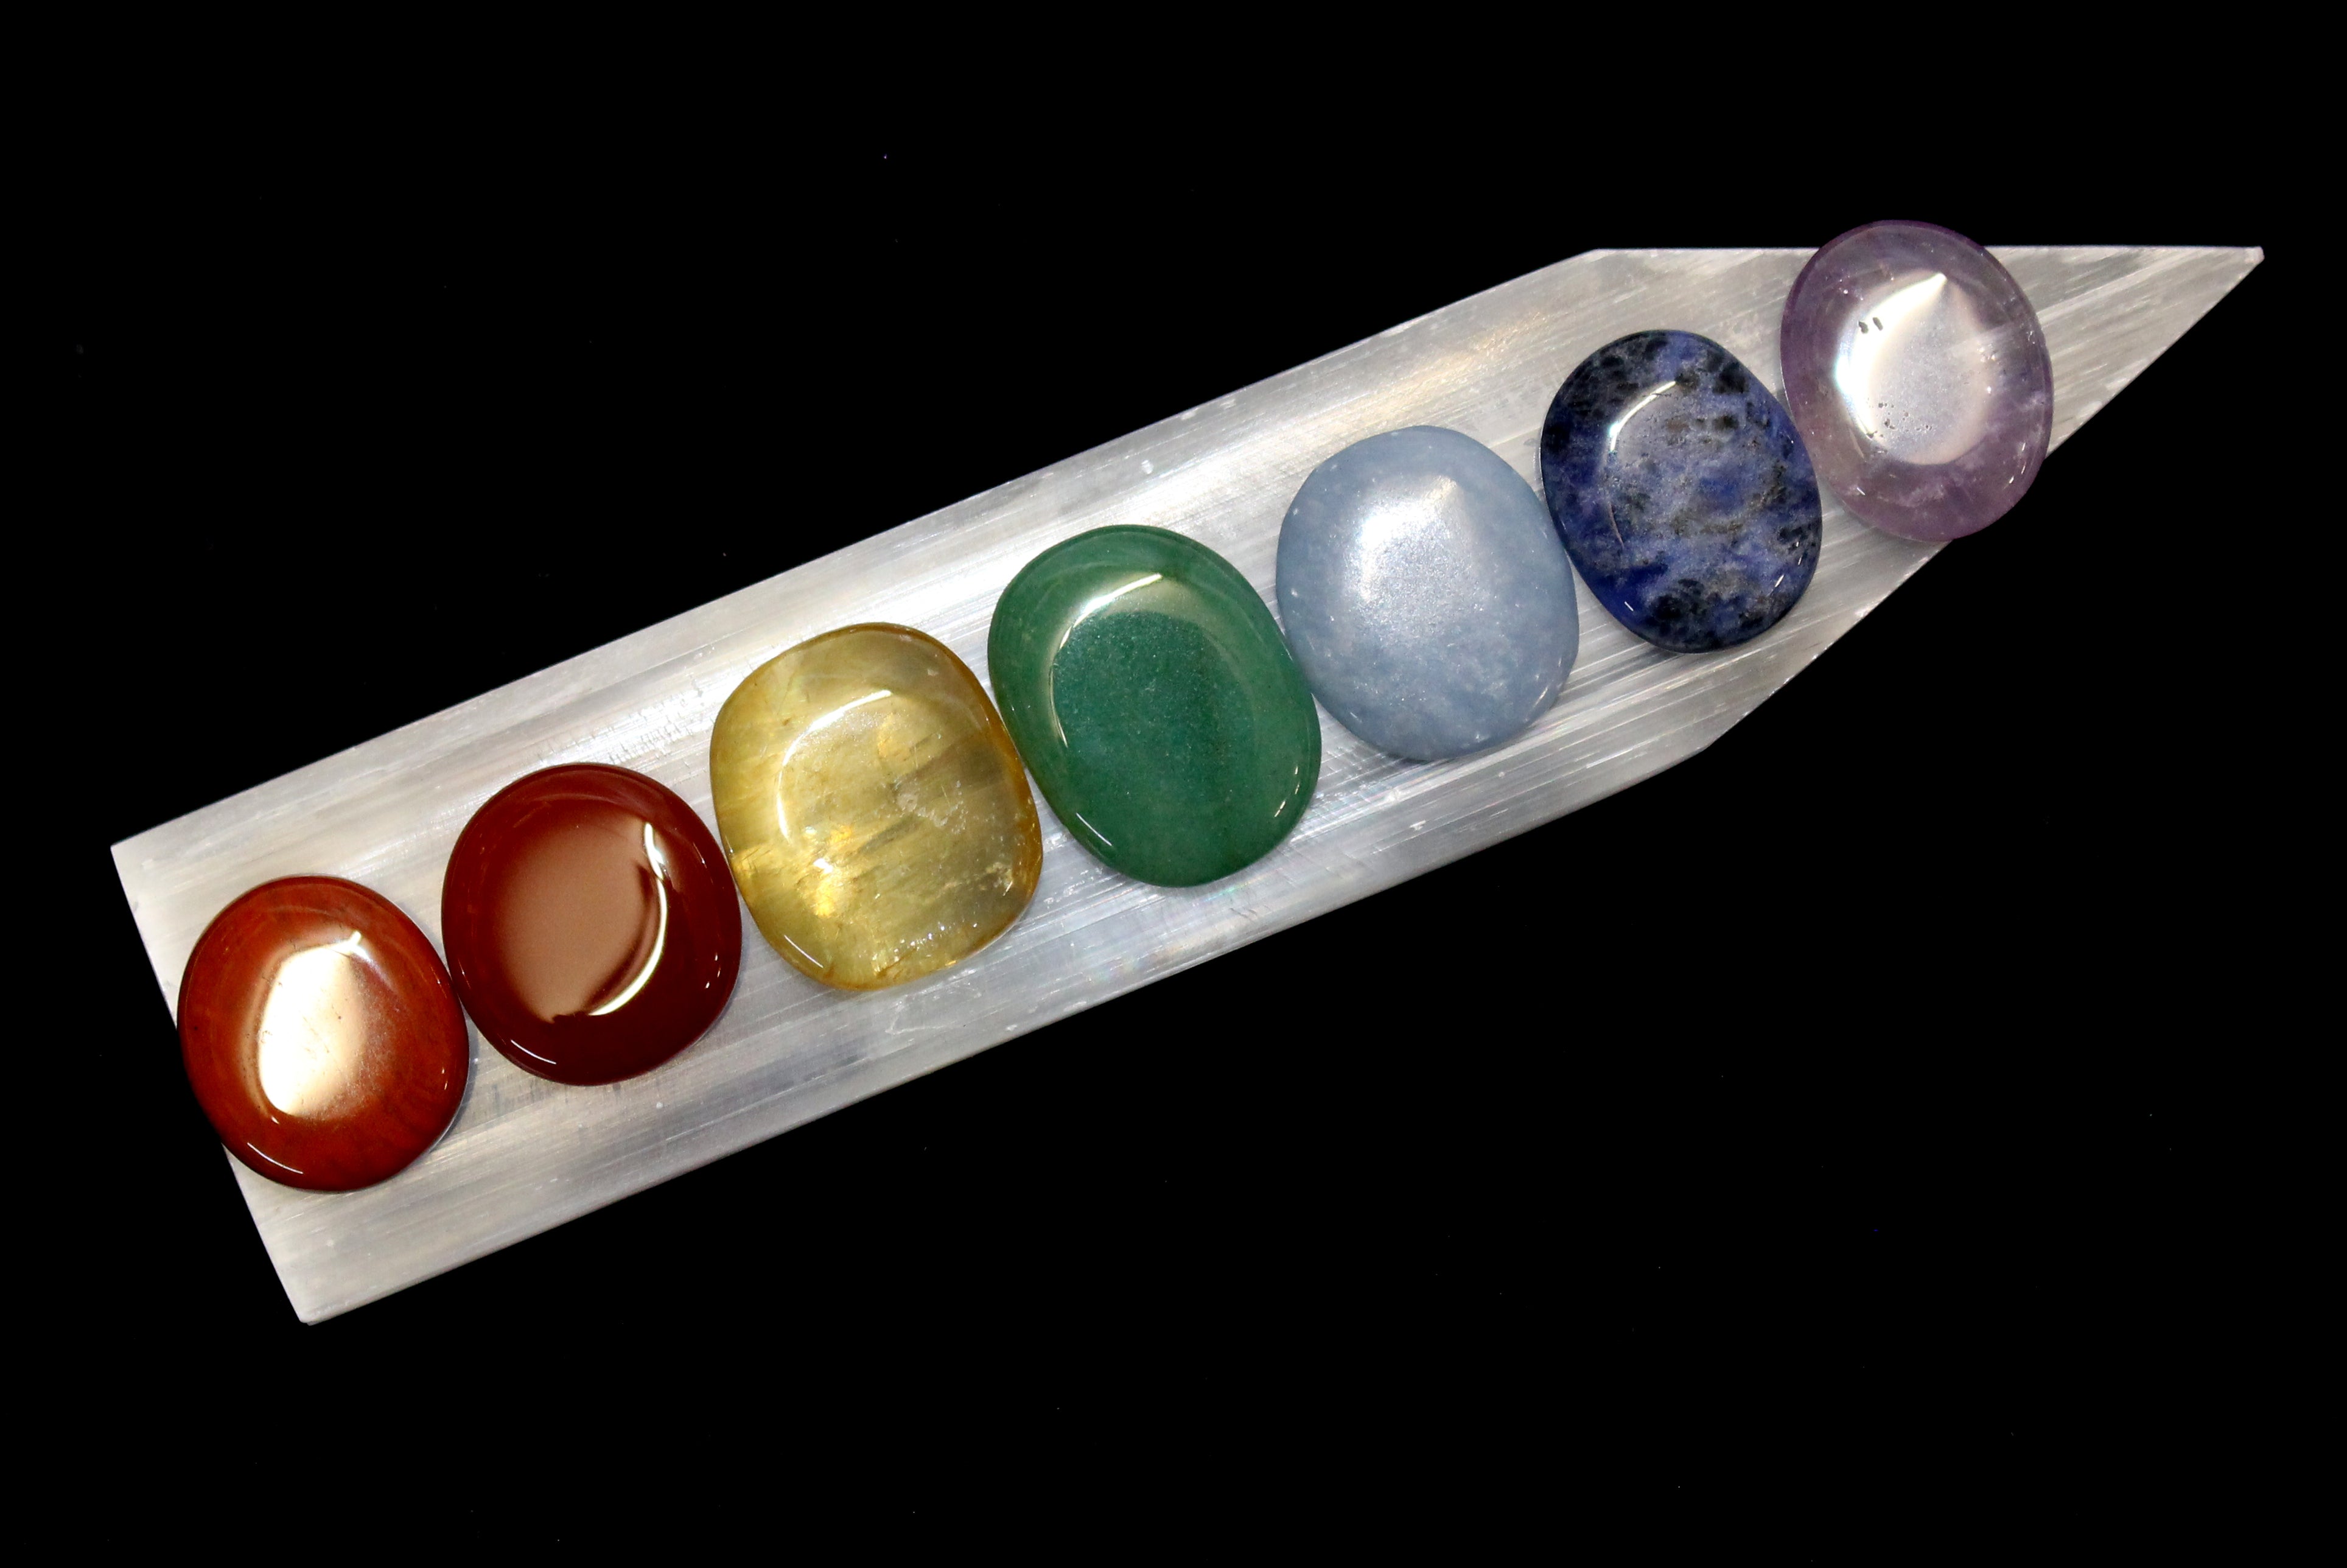 7 stones, red, orange, yellow, green, blue, purple on a charging white ruler, smooth stones polished